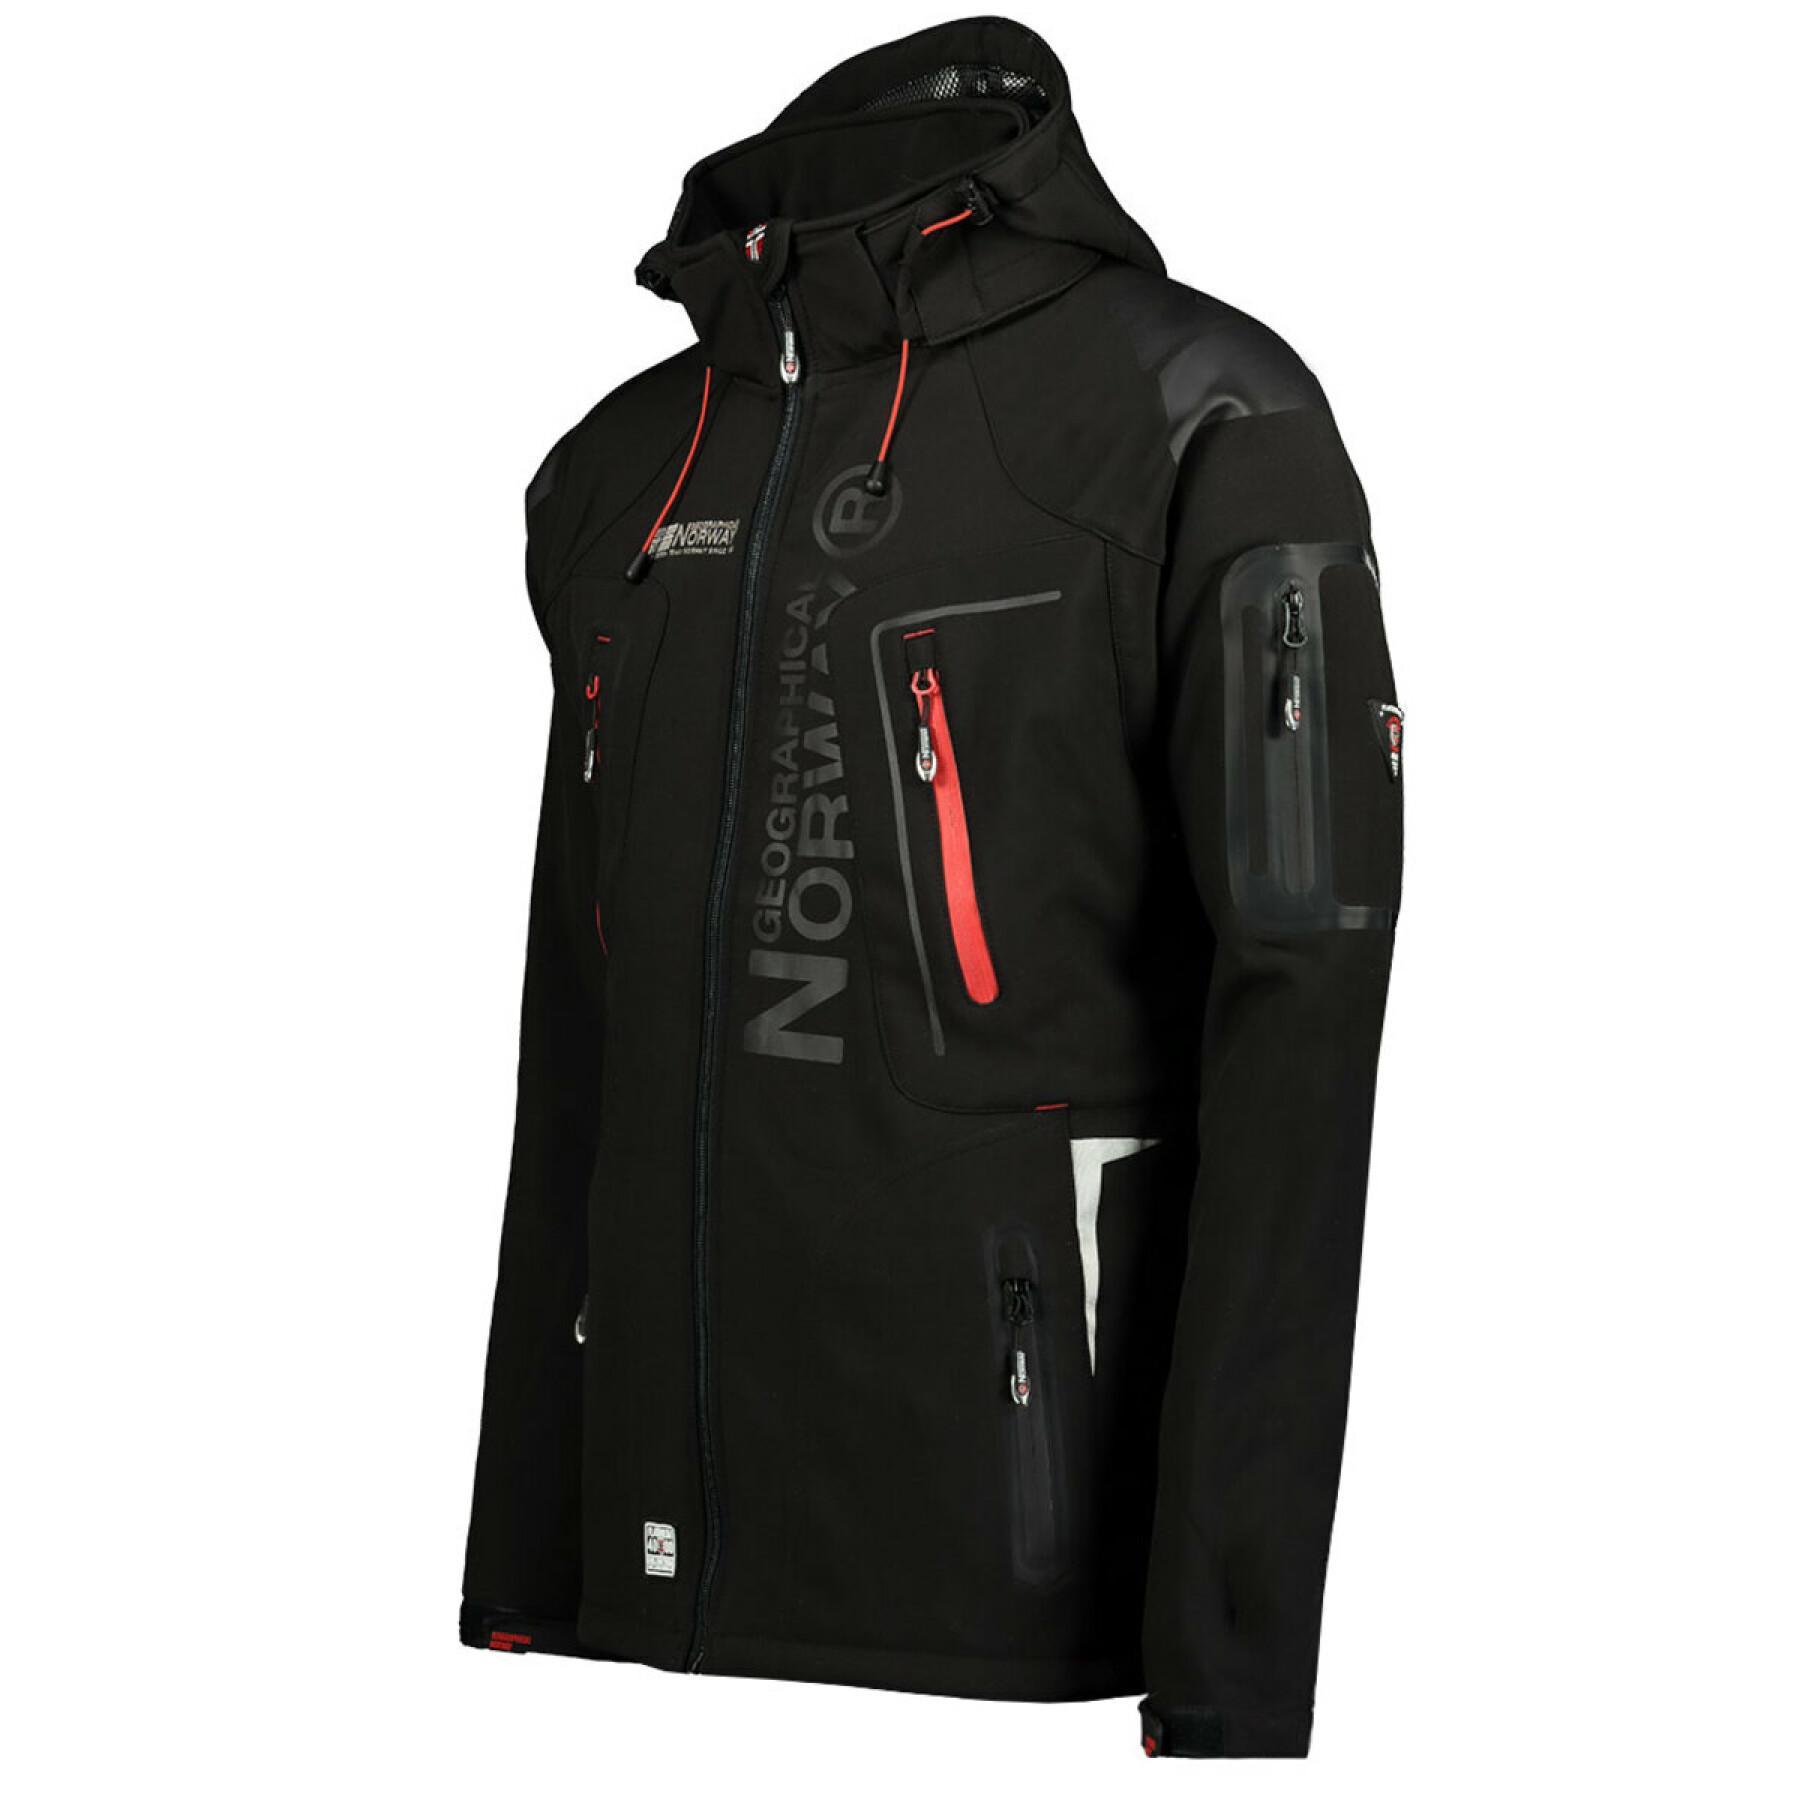 Chaqueta de mujer Geographical Norway Techno Bs3